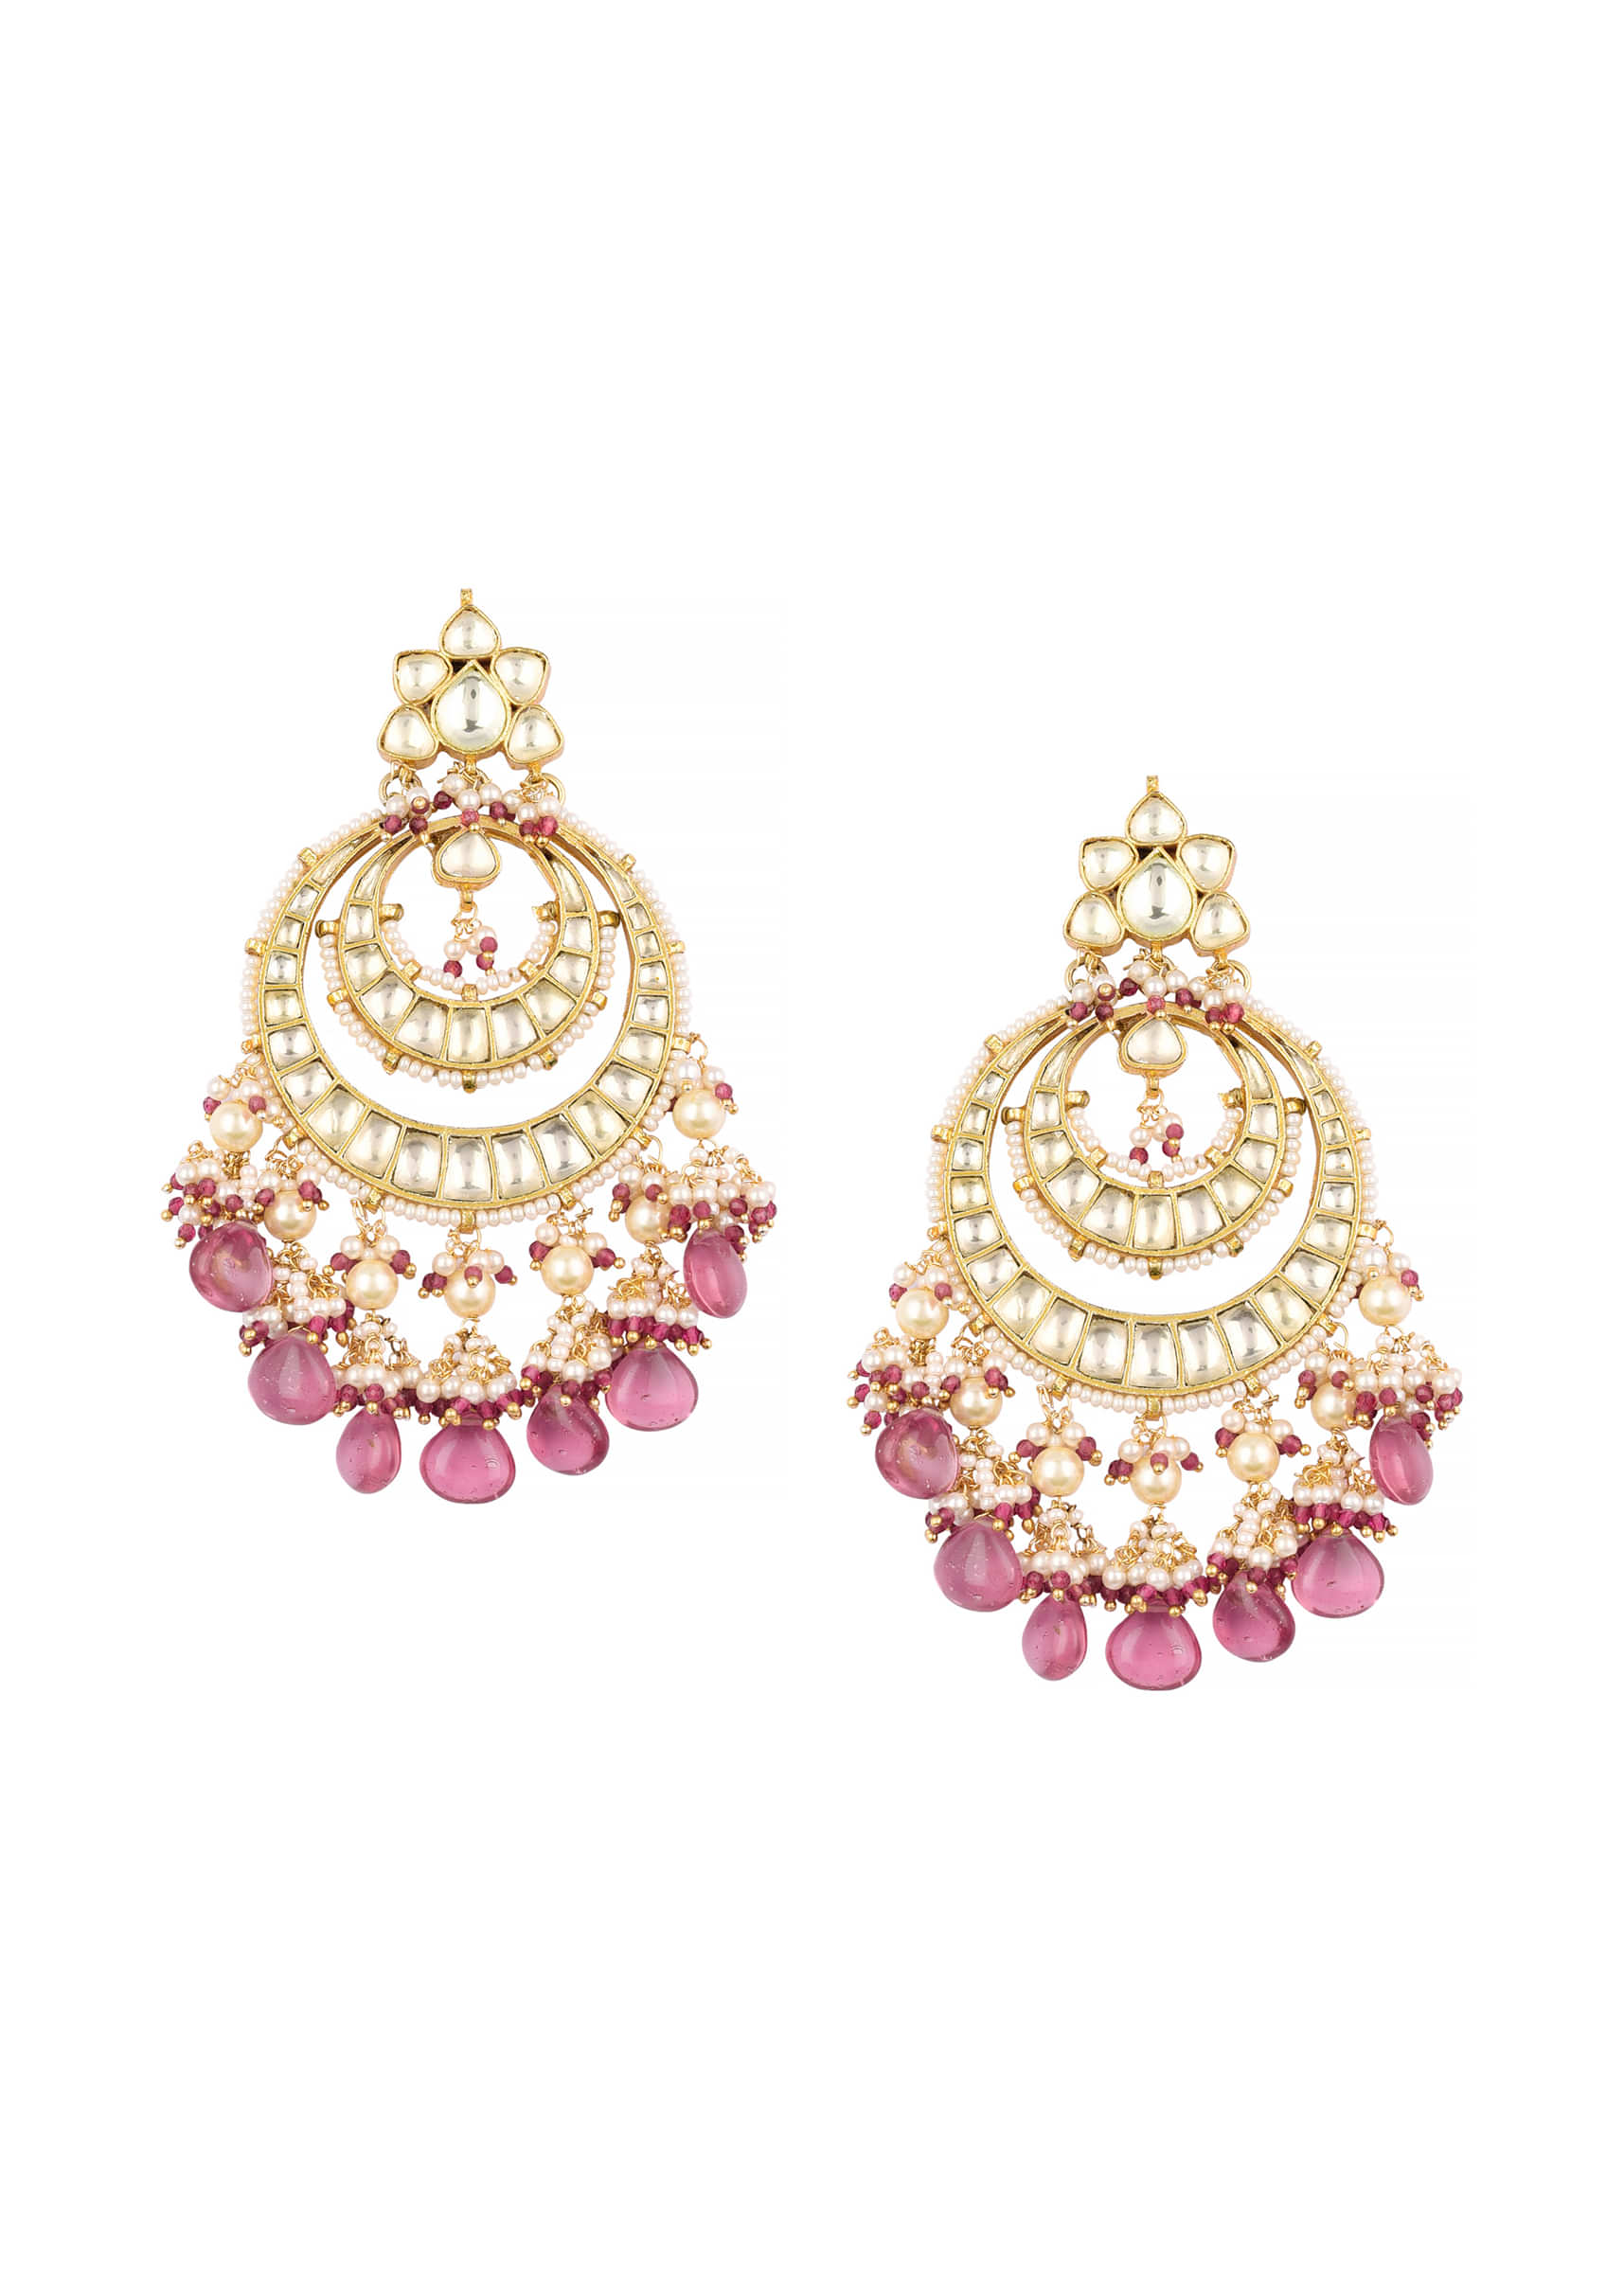 Gold Finish Kundan Earrings With Beads And Ruby Stones